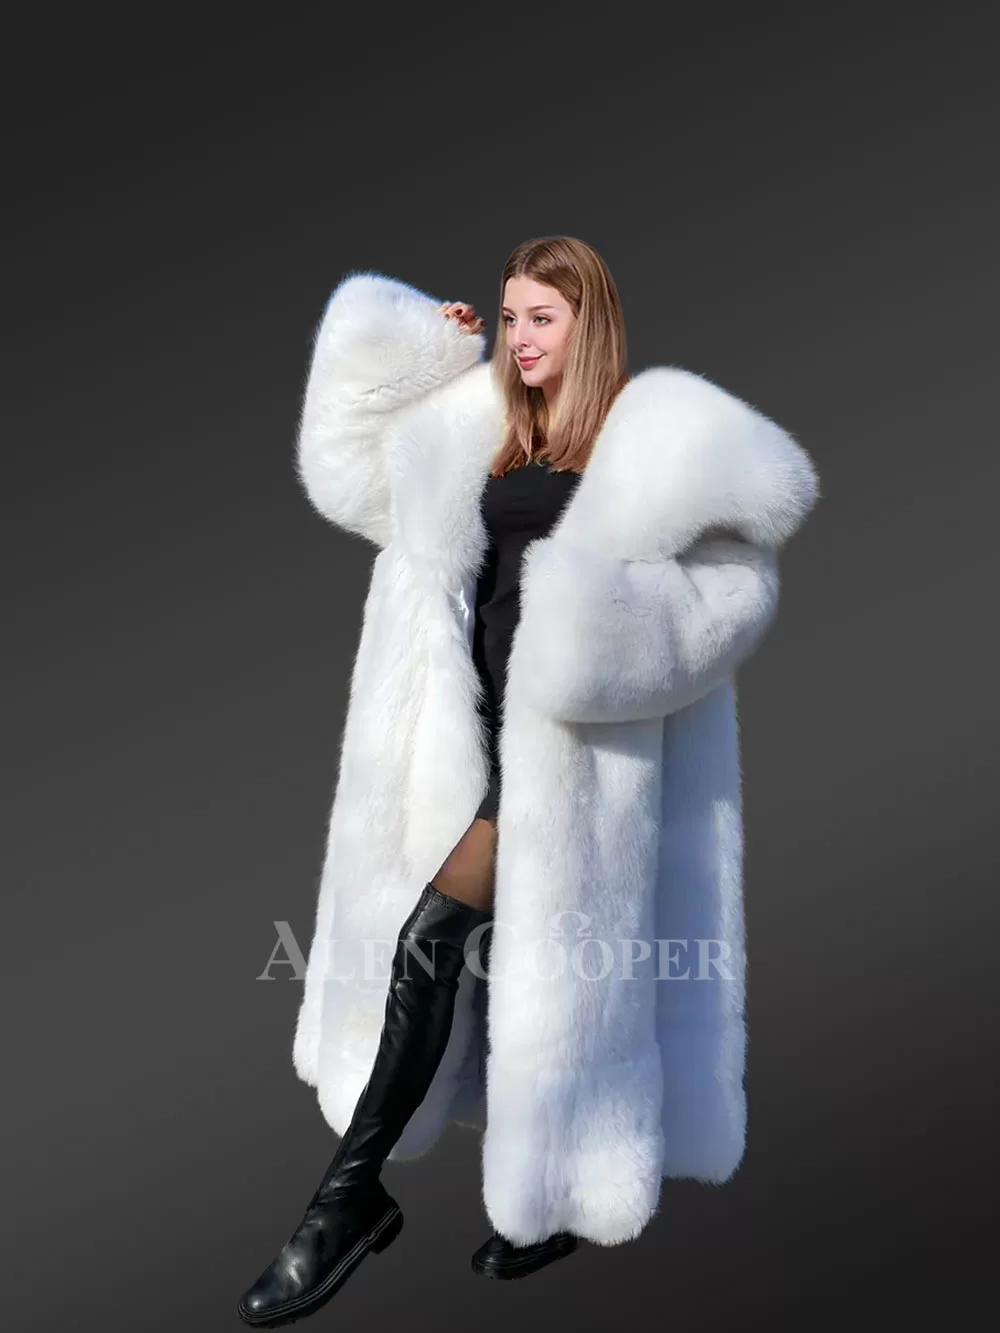 Alen Cooper Luxury White Fox Fur Full Coat for Women Is A Perfect Winter Collection